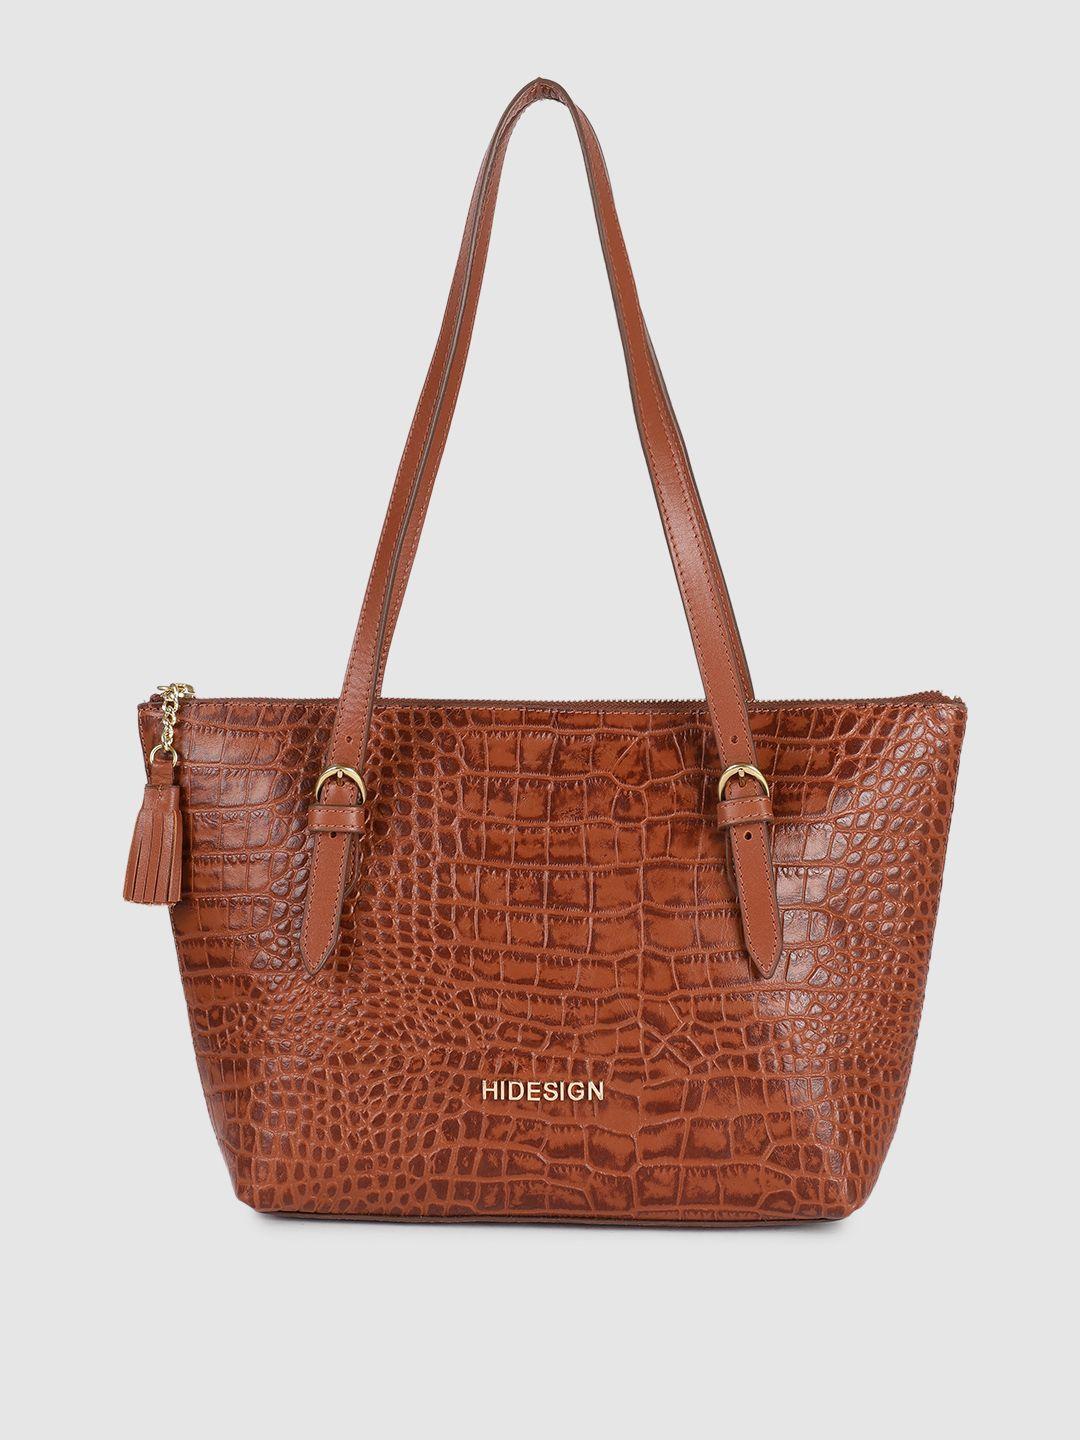 hidesign tan brown textured leather structured shoulder bag with tasselled